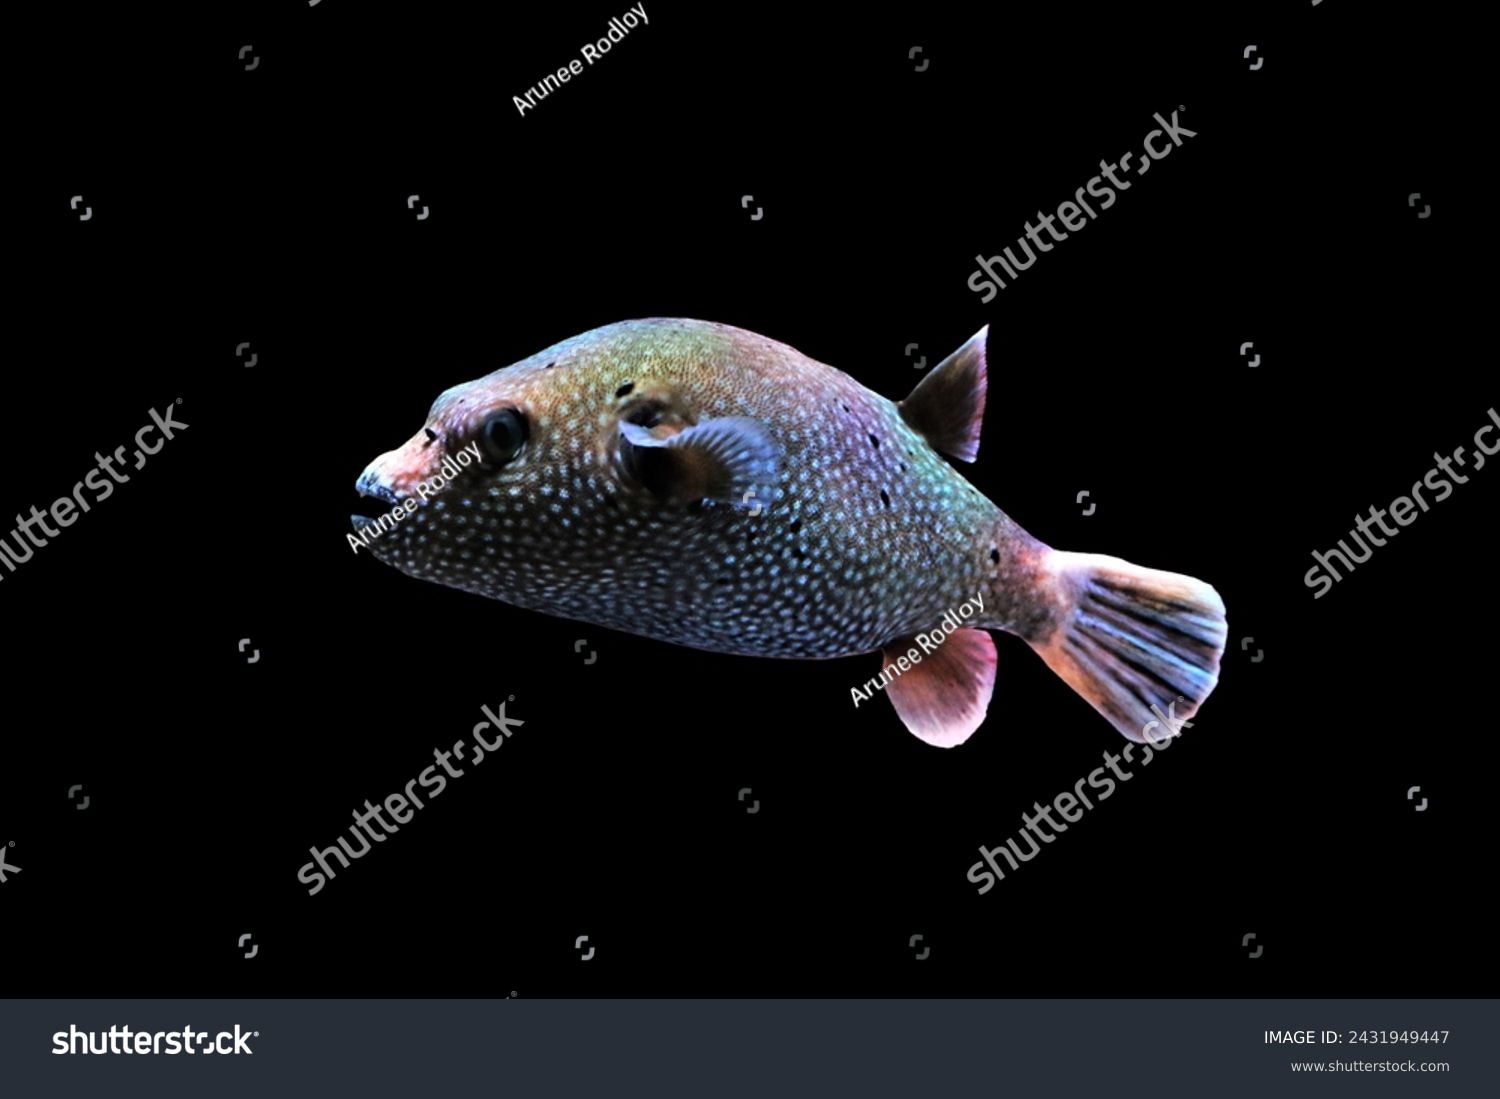 Guineafowl puffer (golden puffer) on isolated black background. Arothron meleagris is marine pufferfish found near coral reefs, native to the Indo-Pacific and Eastern Pacific. #2431949447